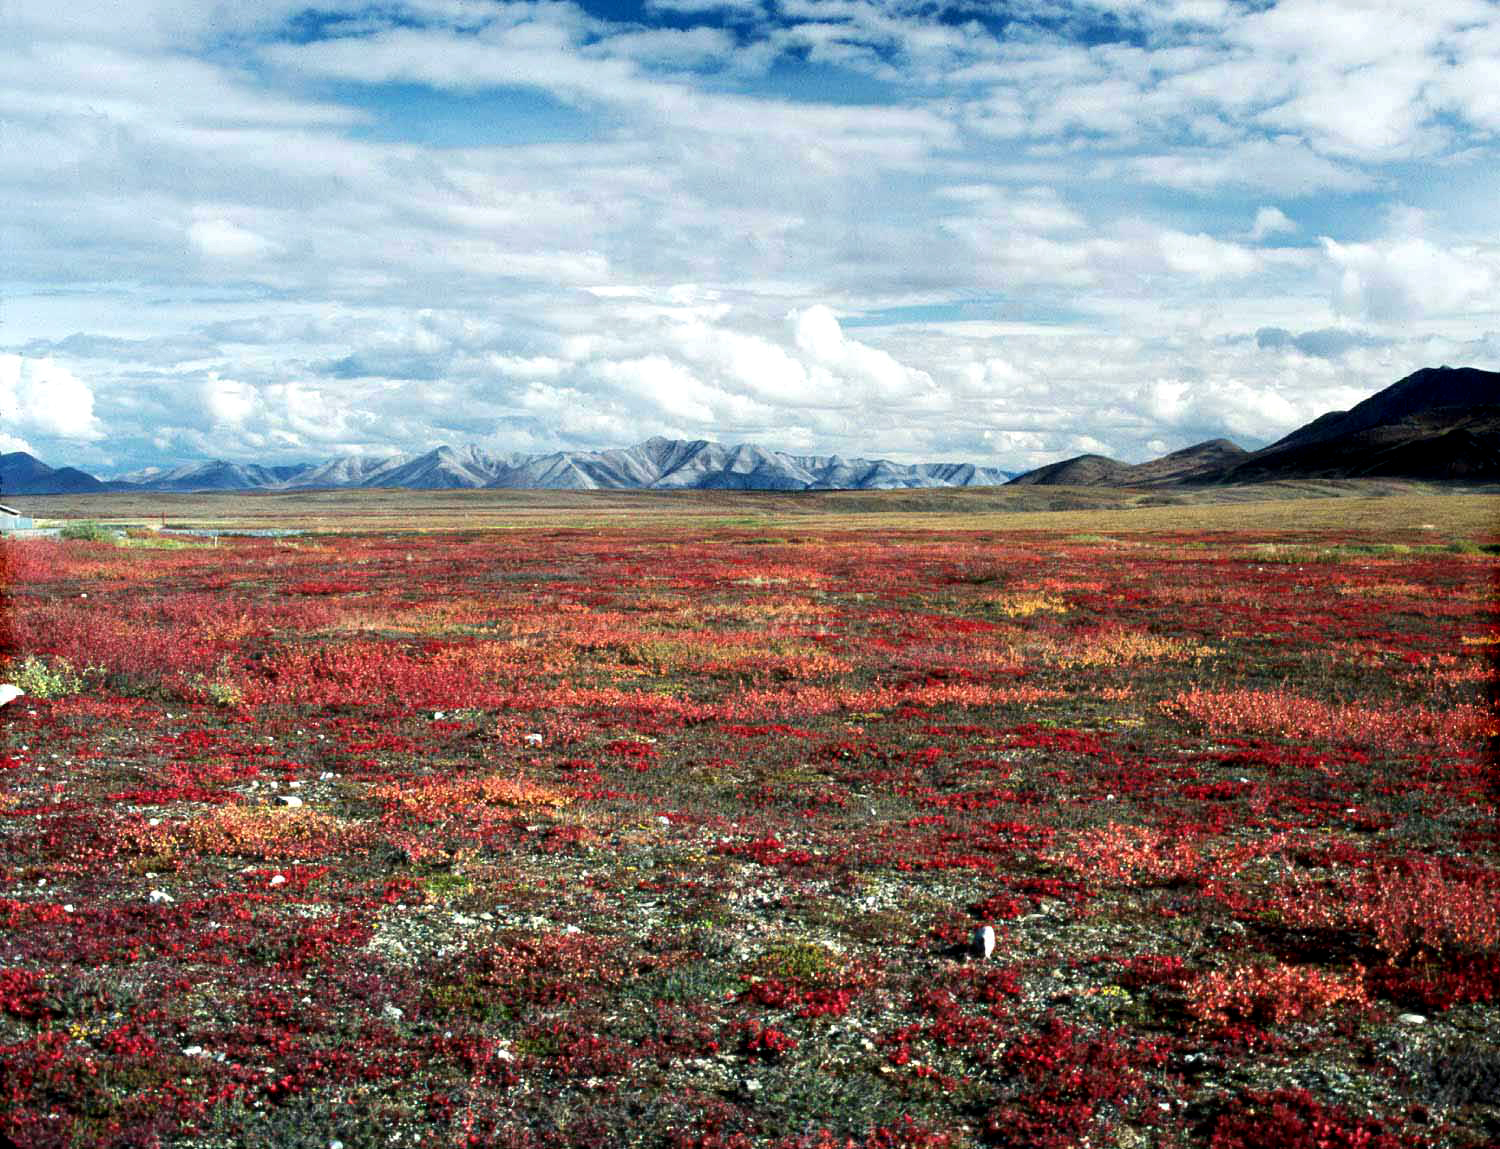 Autumn colors, with the Brooks Range in the background, near the Sagavanirktok River, Alaska. This area is part of the Arctic Long Term Ecological Research (ARC LTER) which is operating only the most essential research during the COVID-19 lockdown. Photo by Jim Laundre, Arctic LTER